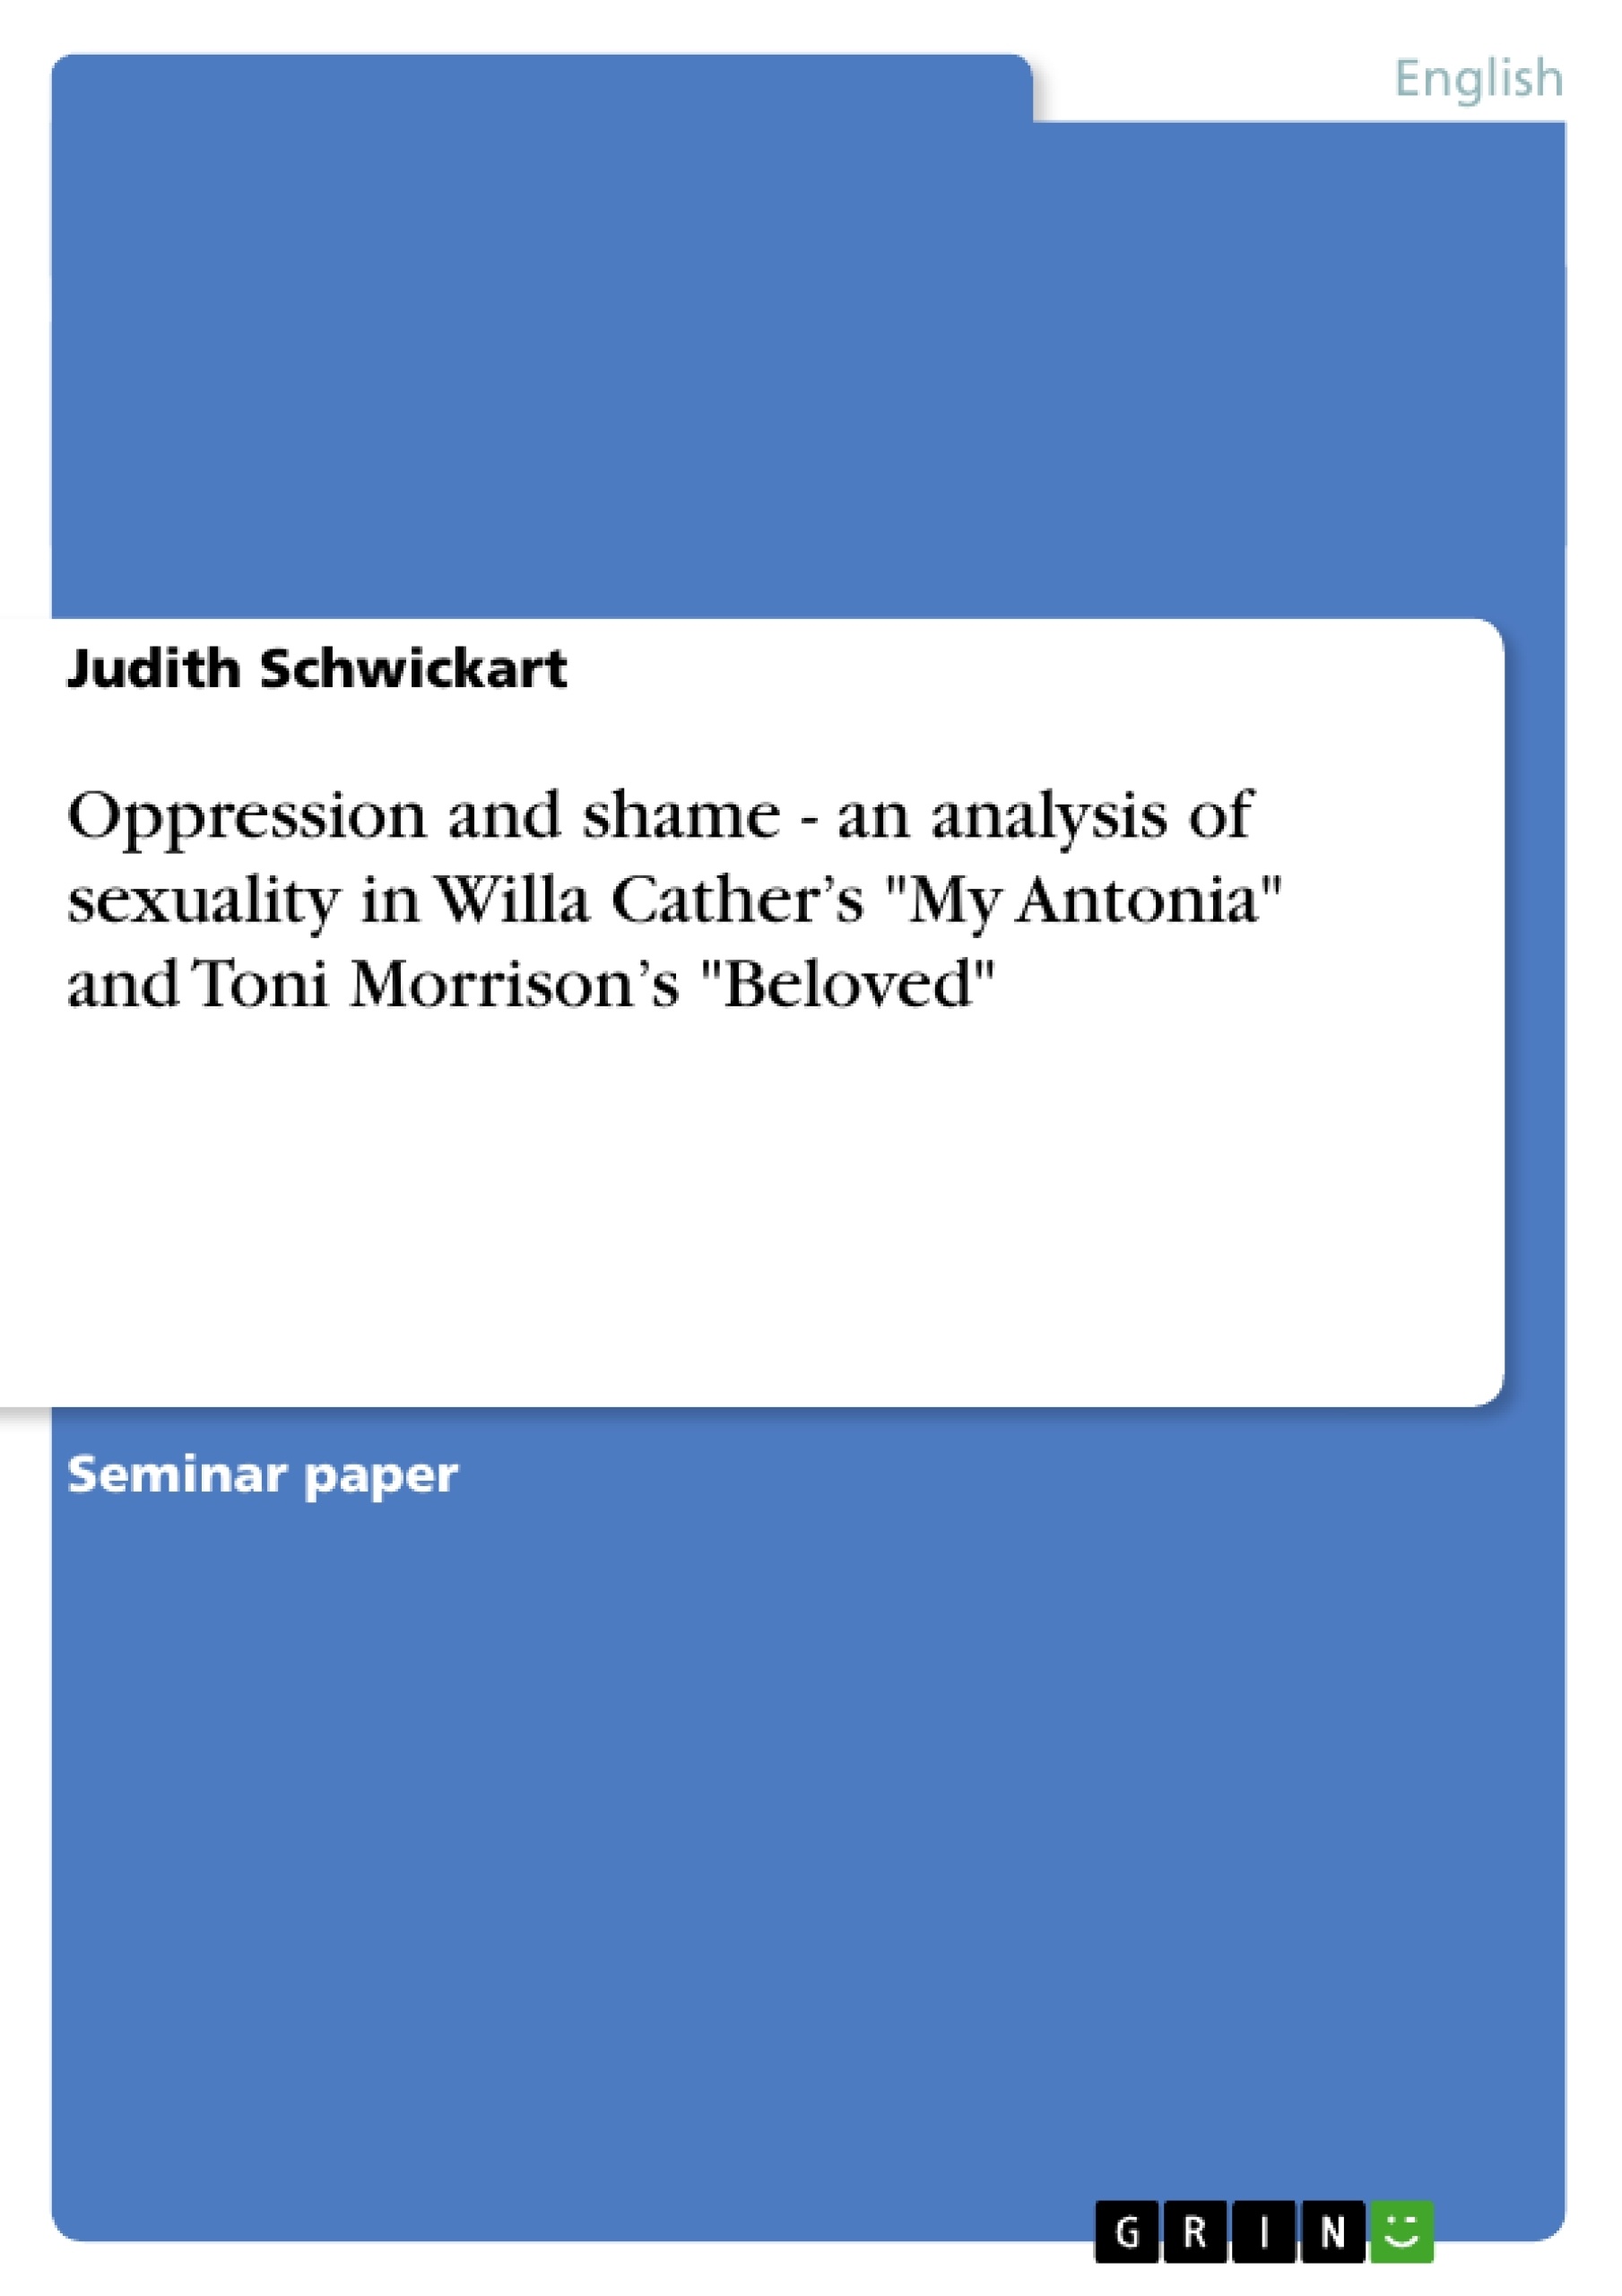 Titre: Oppression and shame - an analysis of sexuality in Willa Cather’s "My Antonia" and Toni Morrison’s "Beloved"